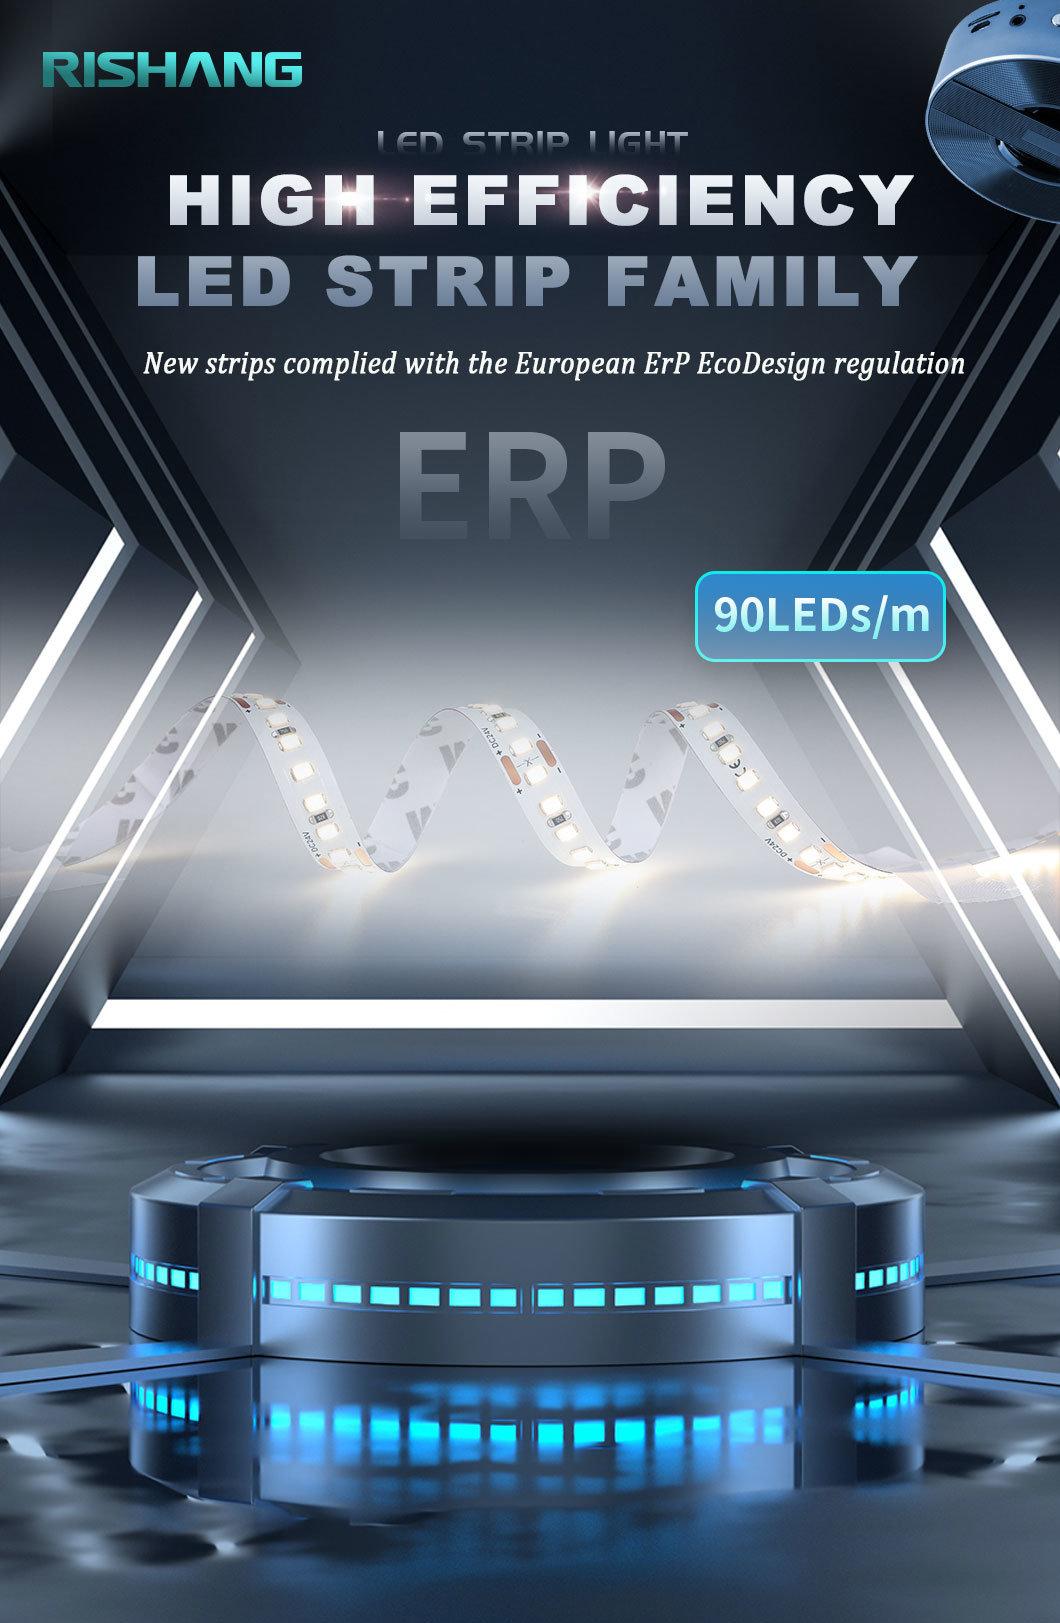 Top Grade Quality Flexible RGB LED Strip Lights Certificated by ERP, CE En62471 Light Biosafety, RoHS